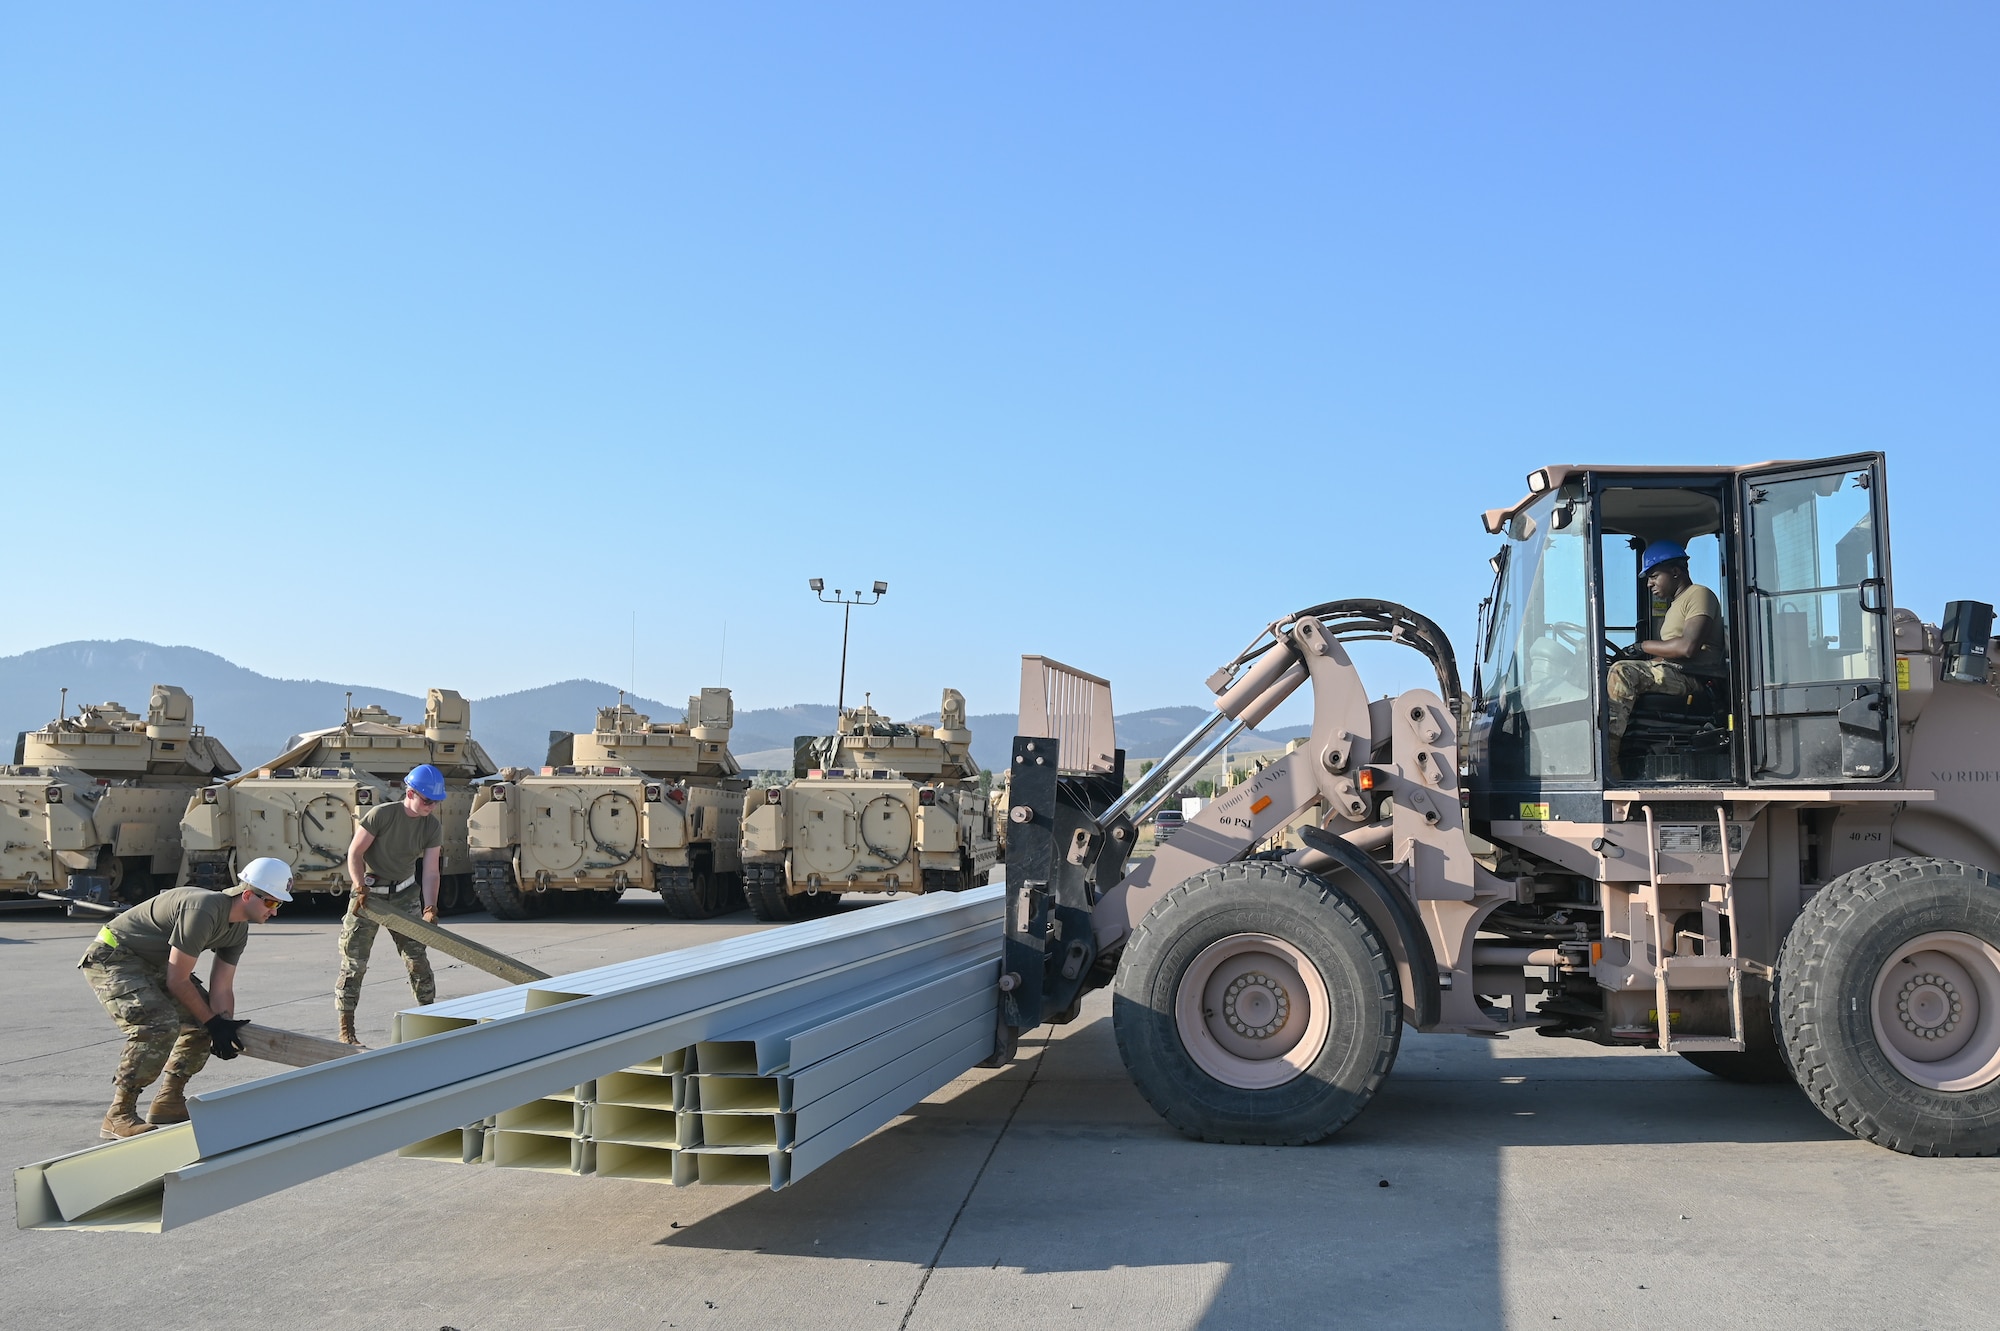 Members with the 131st Civil Engineer Squadron began working hand-in-hand with the 219th Red Horse Squadron to build a storage facility for M1 Abrams tanks at Fort William Henry Harrison, Montana.